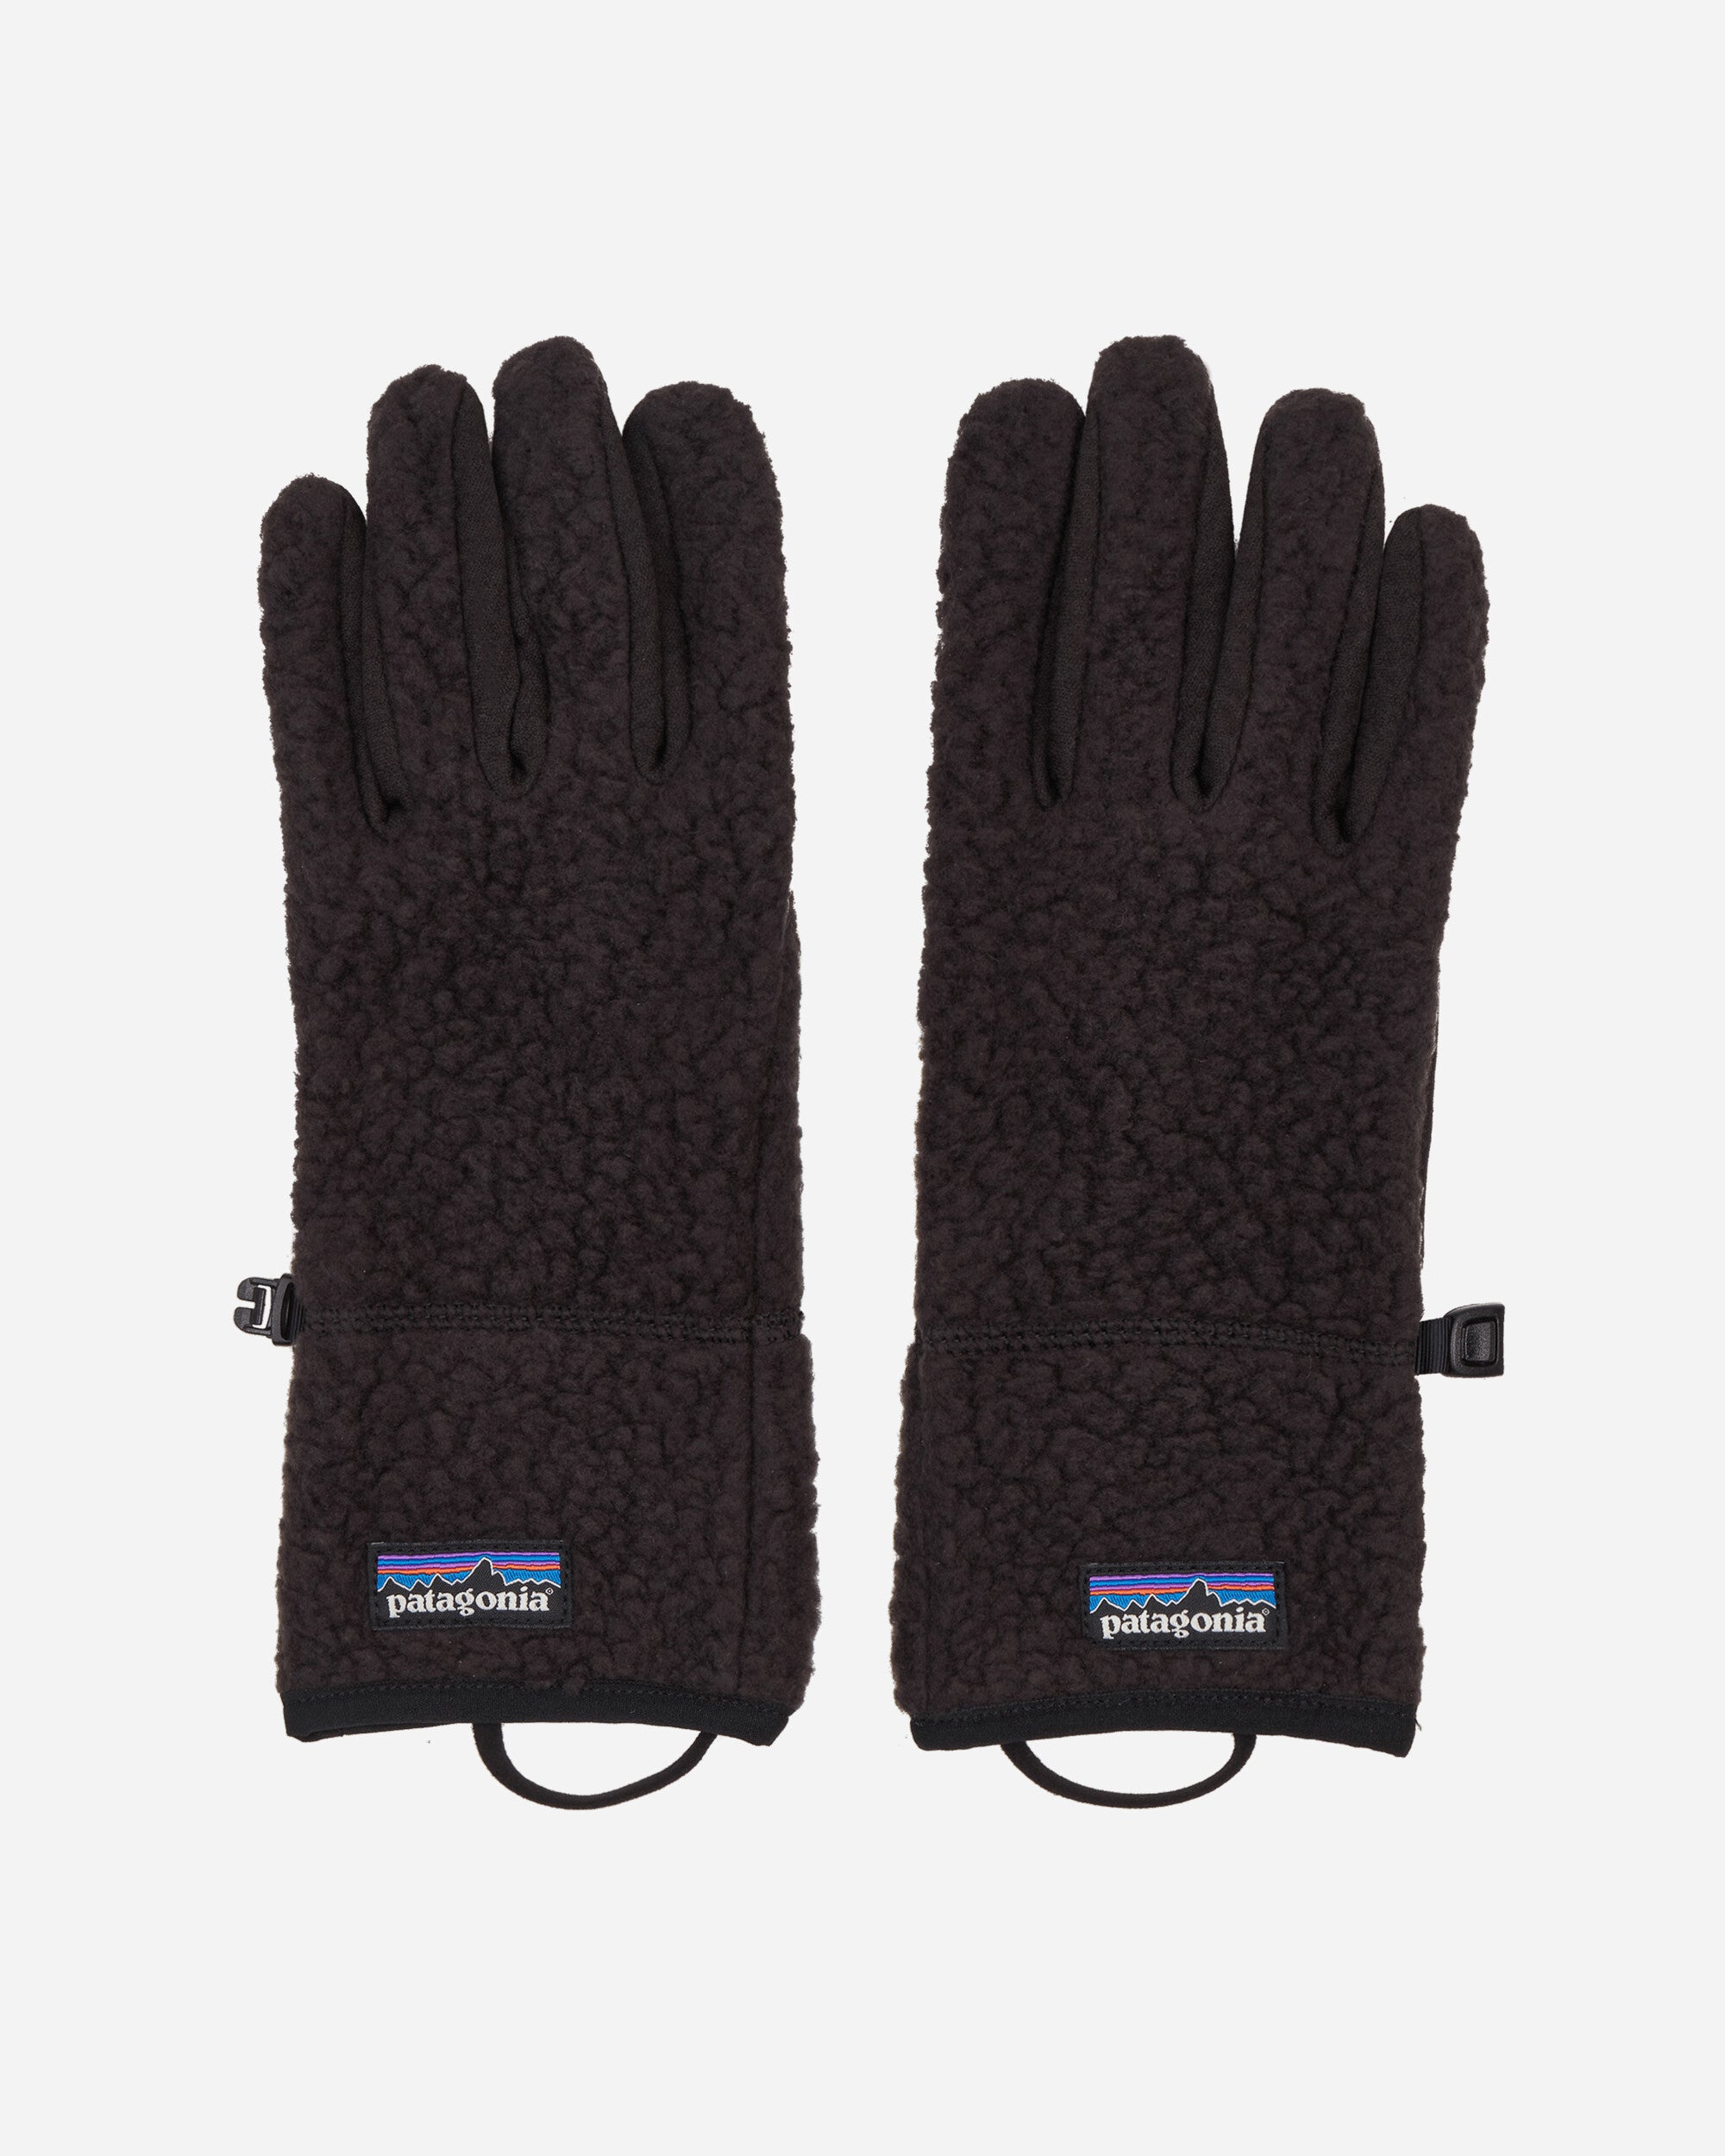 Patagonia Wmns Retro Pile Gloves Black Gloves and Scarves Gloves 34585 BLK